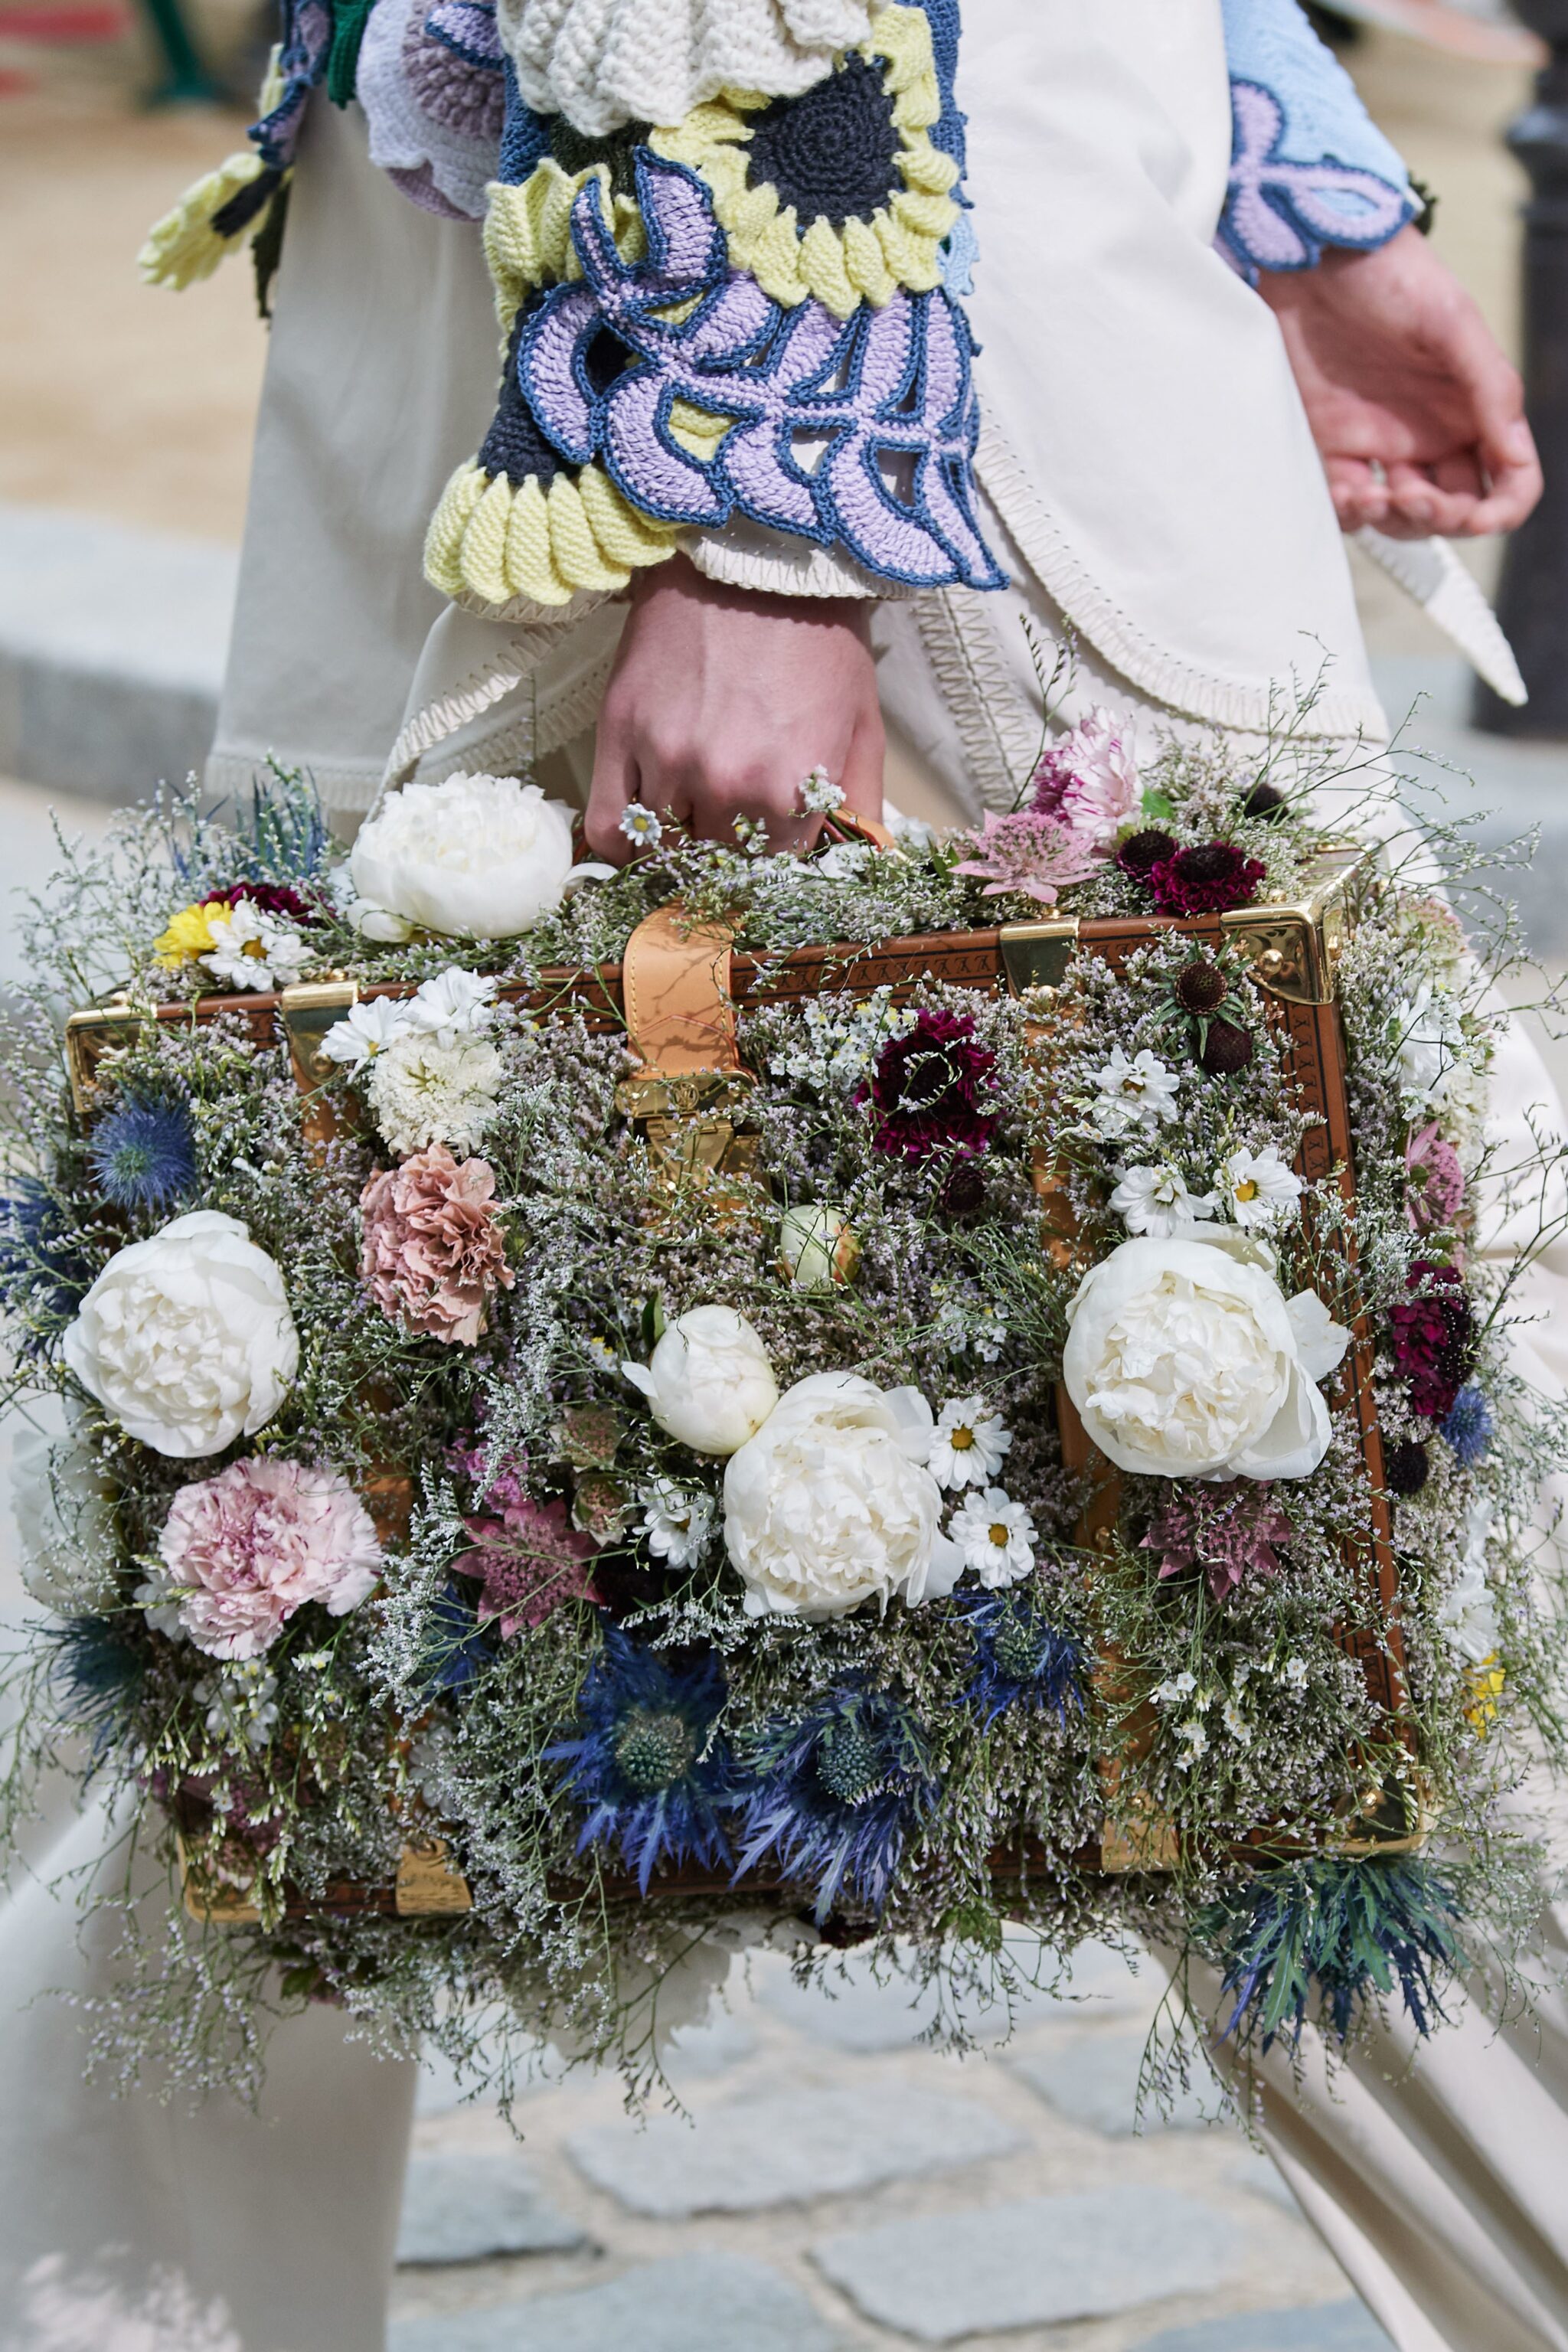 Spring flowers inspire Louis Vuitton menswear collection